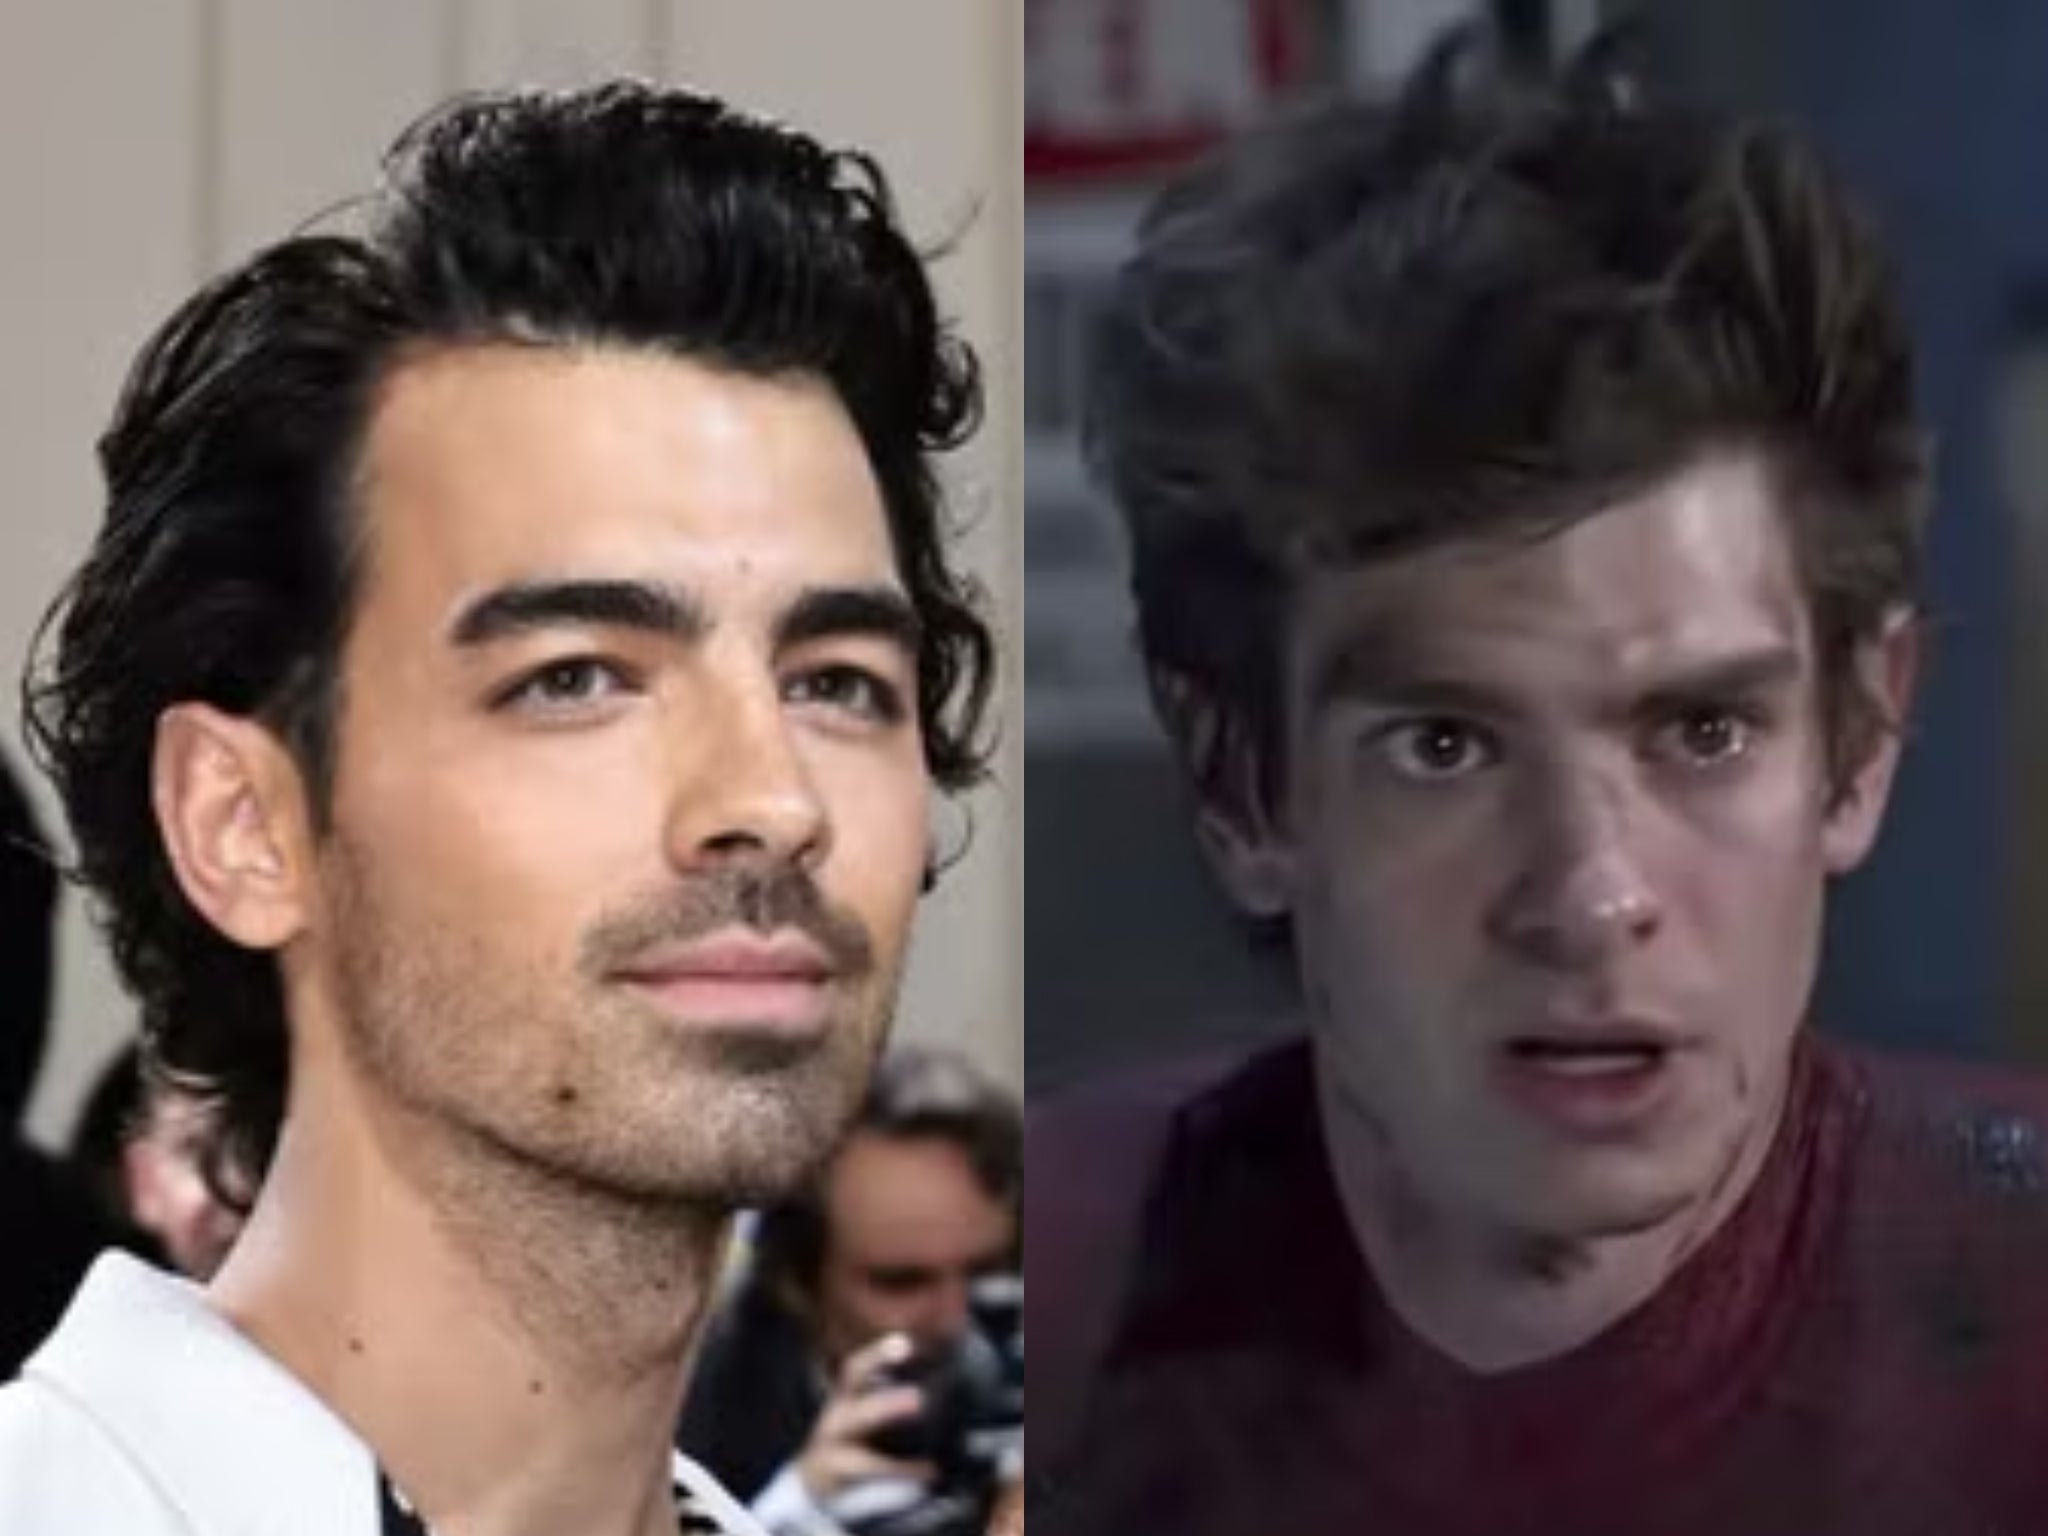 Joe Jonas explains why he thought he had a shot at getting Spider-Man role over Andrew Garfield